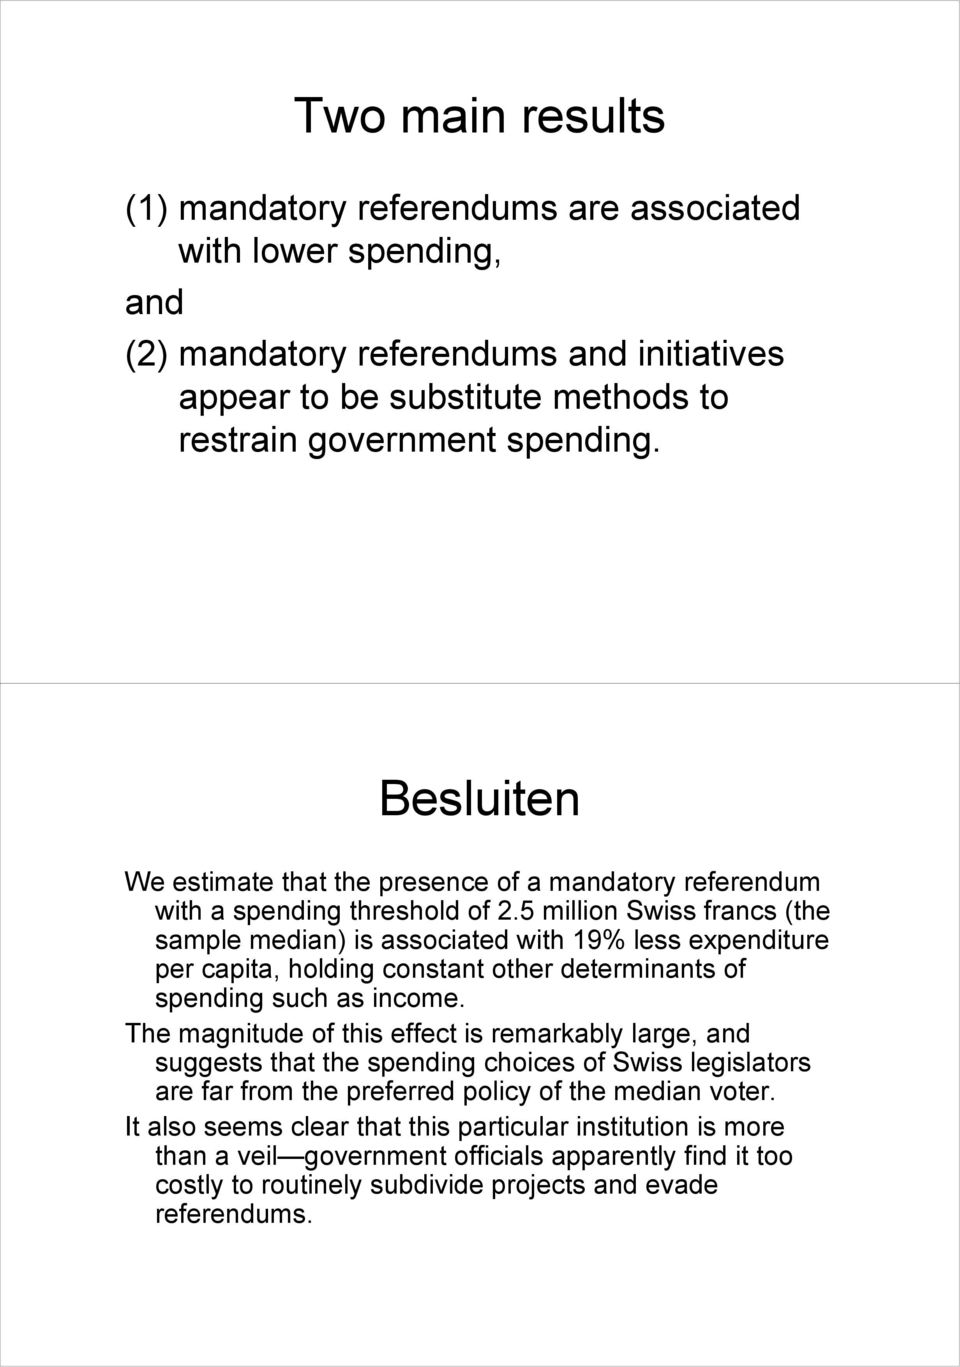 5 million Swiss francs (the sample median) is associated with 19% less expenditure per capita, holding constant other determinants of spending such as income.